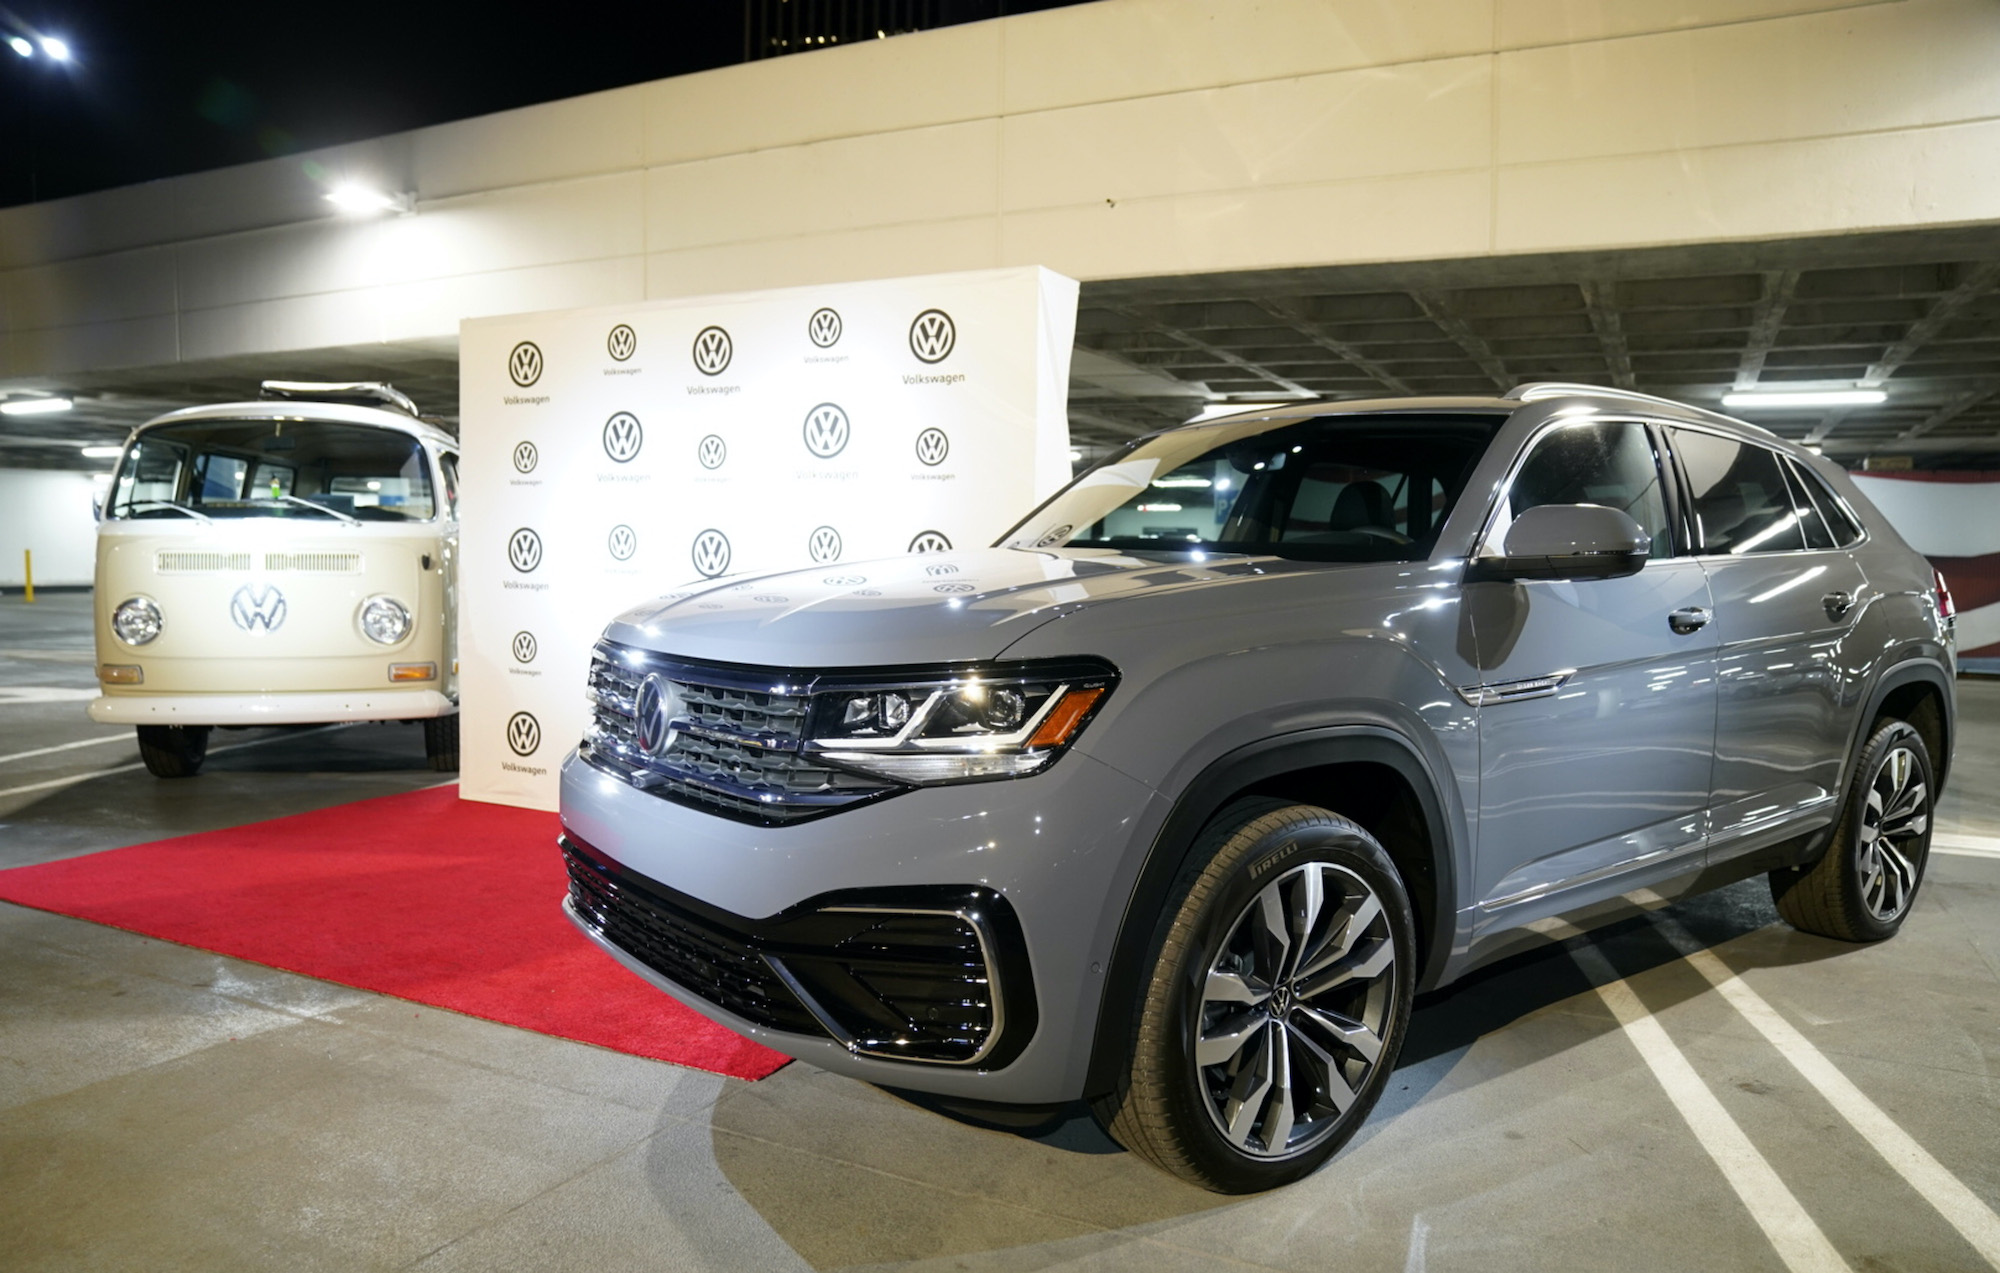 An electrified Volkswagen Type 2 Bus and the all-new 2020 Atlas Cross Sport on display at the fourth annual Volkswagen Drive-In Movie